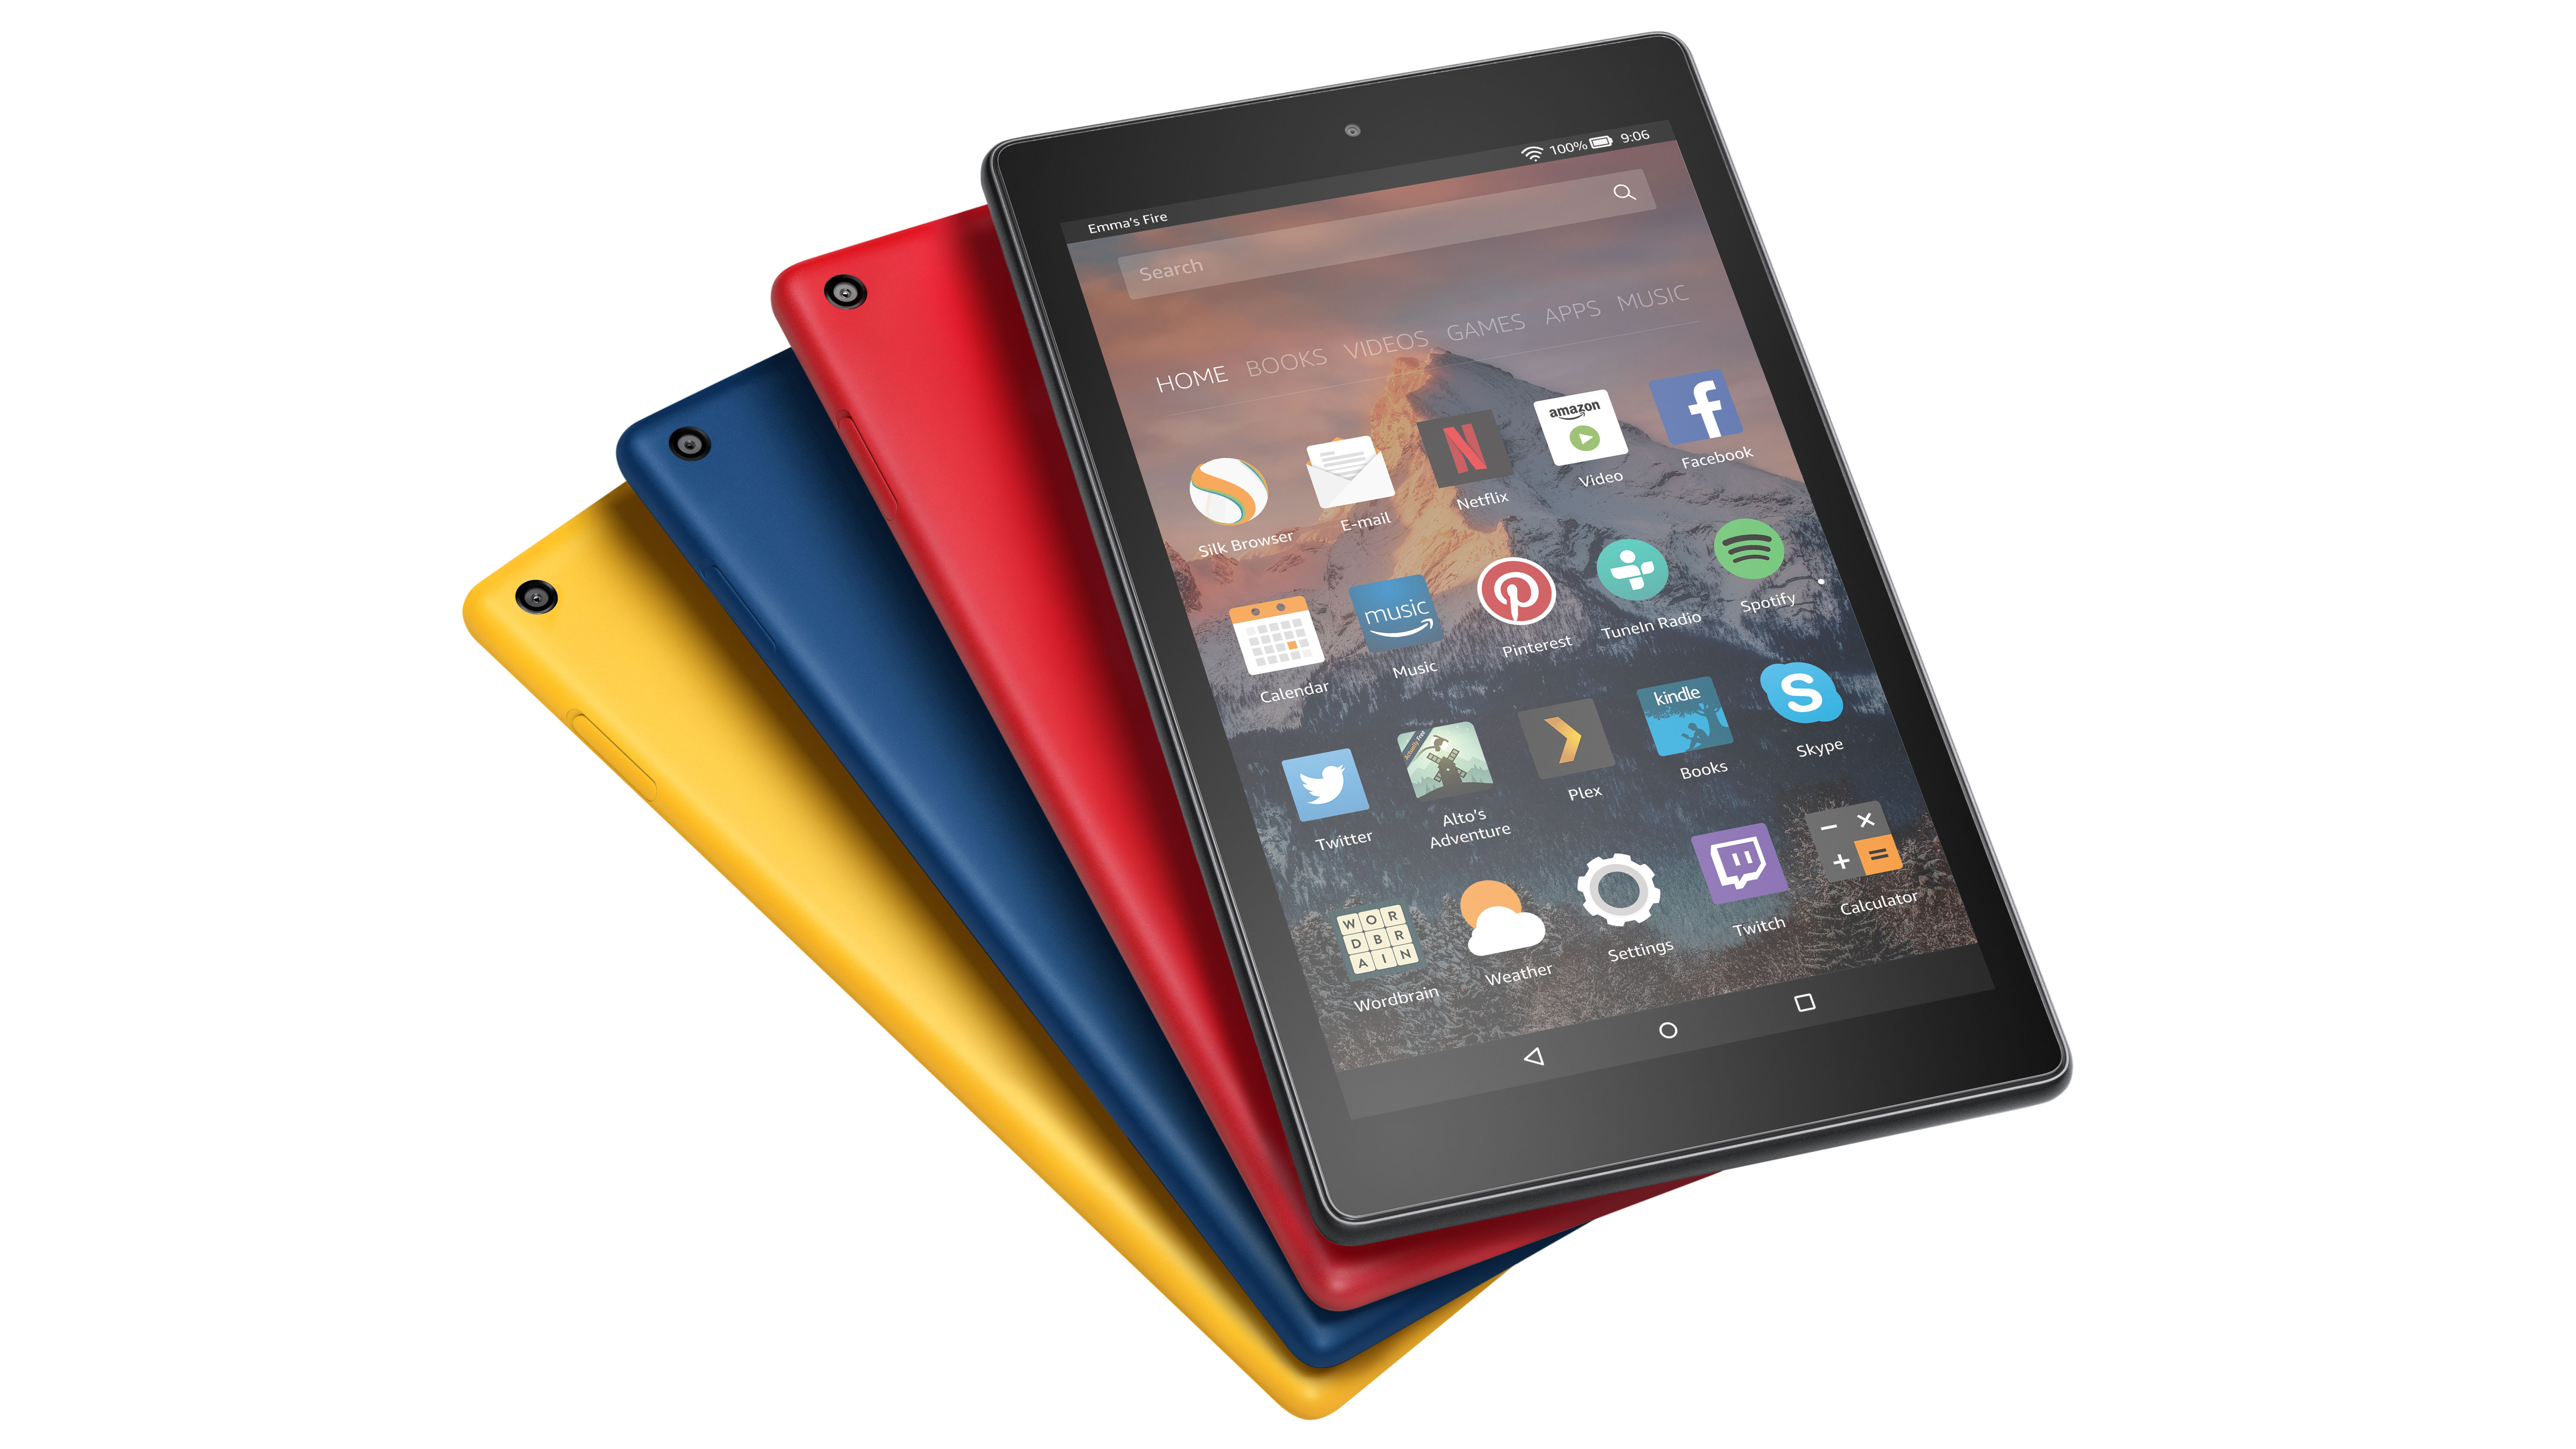 Amazon Fire Tablet price how much does it cost? TechRadar